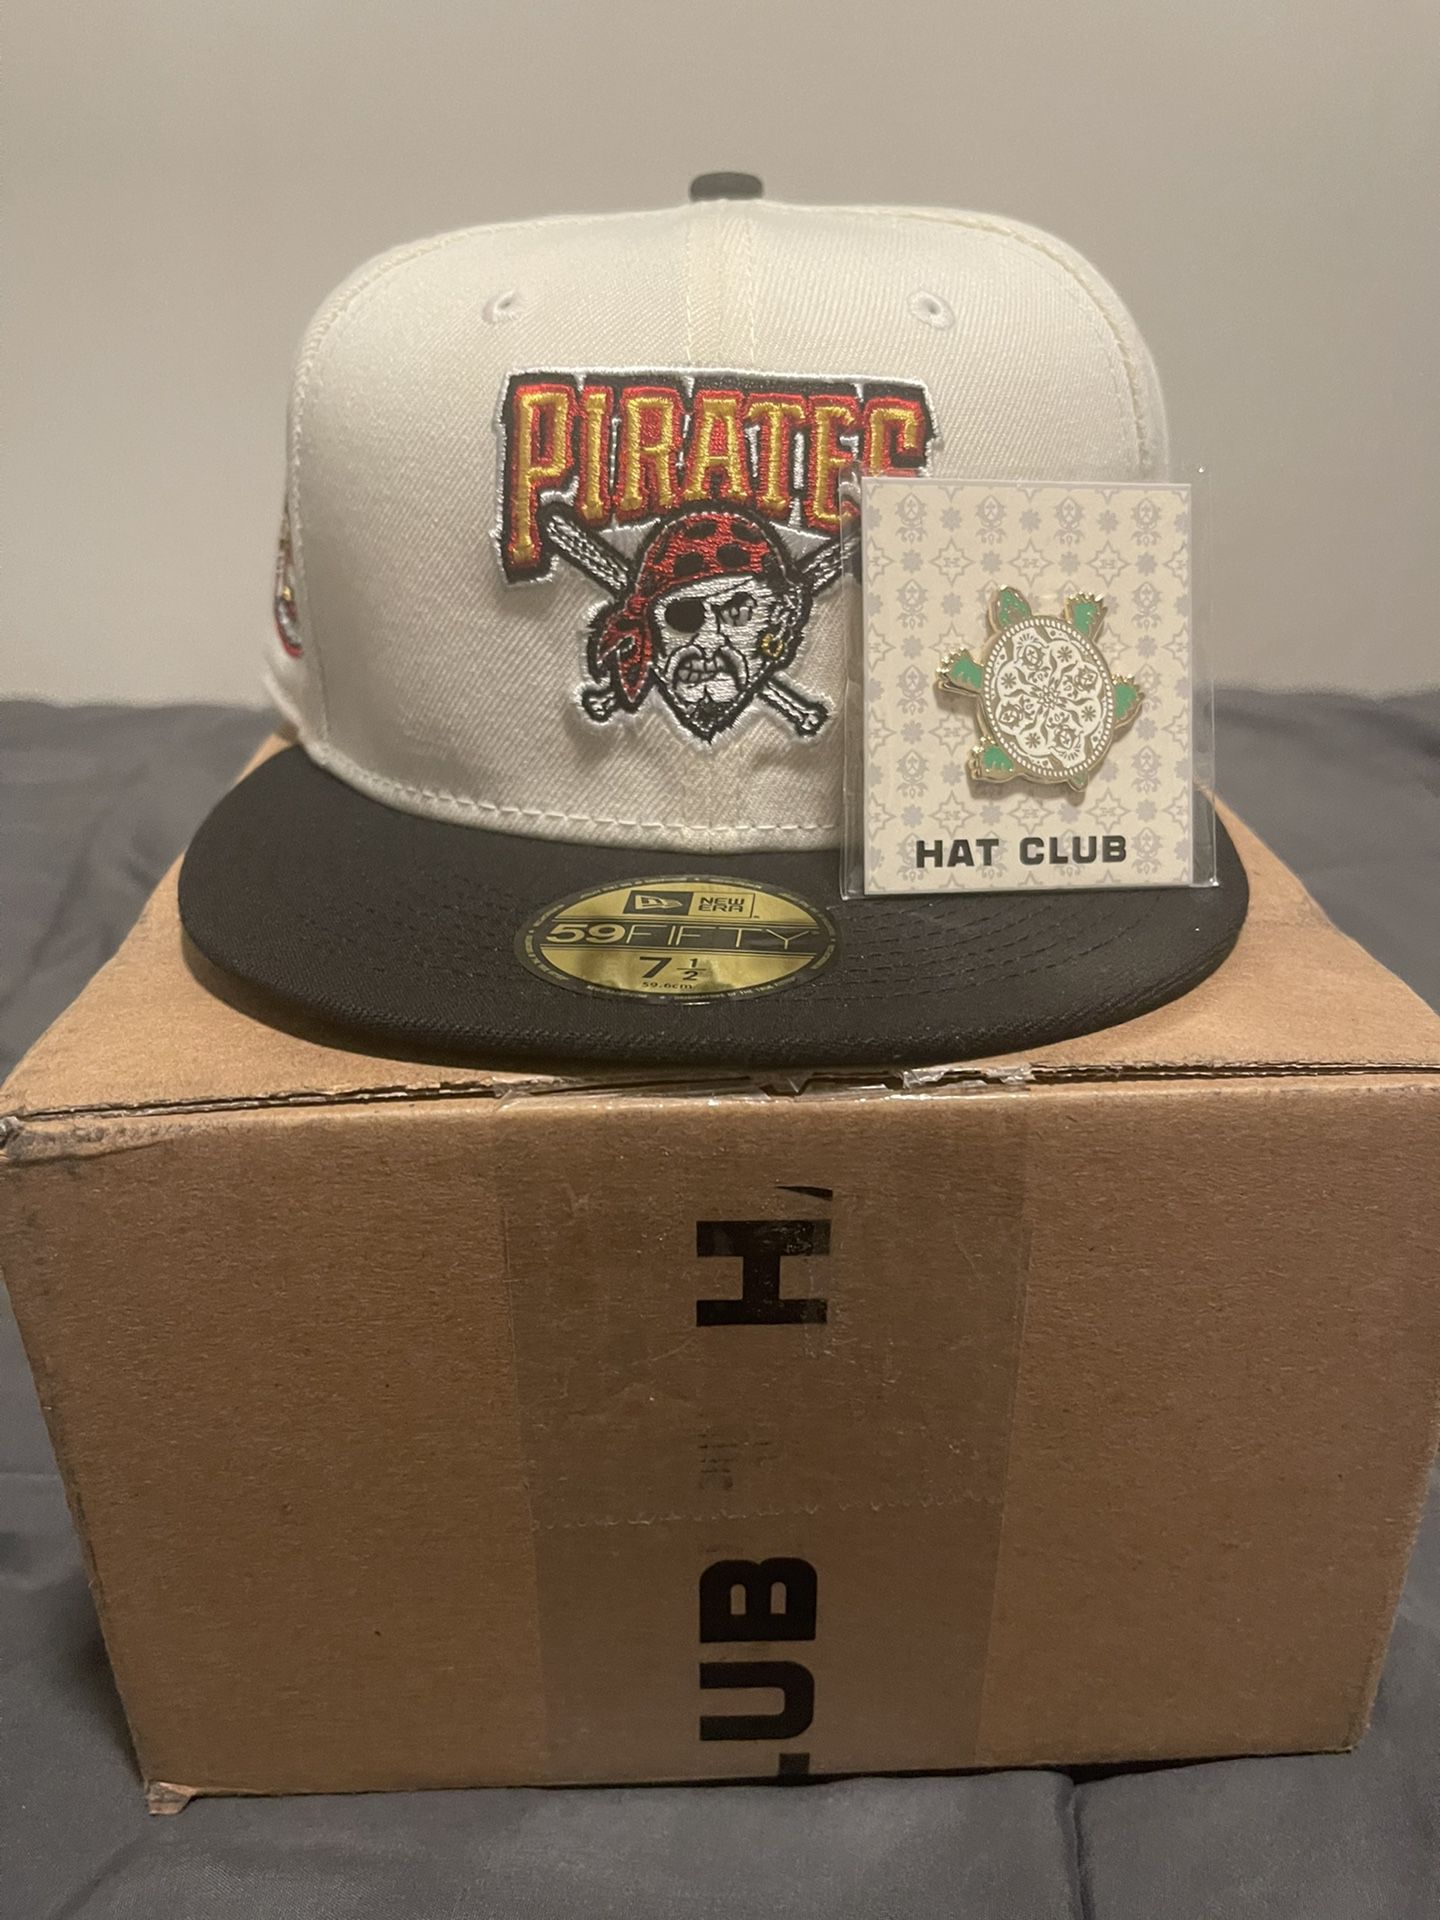 Pirates fitted White Dome 7 1/2 hatclub 